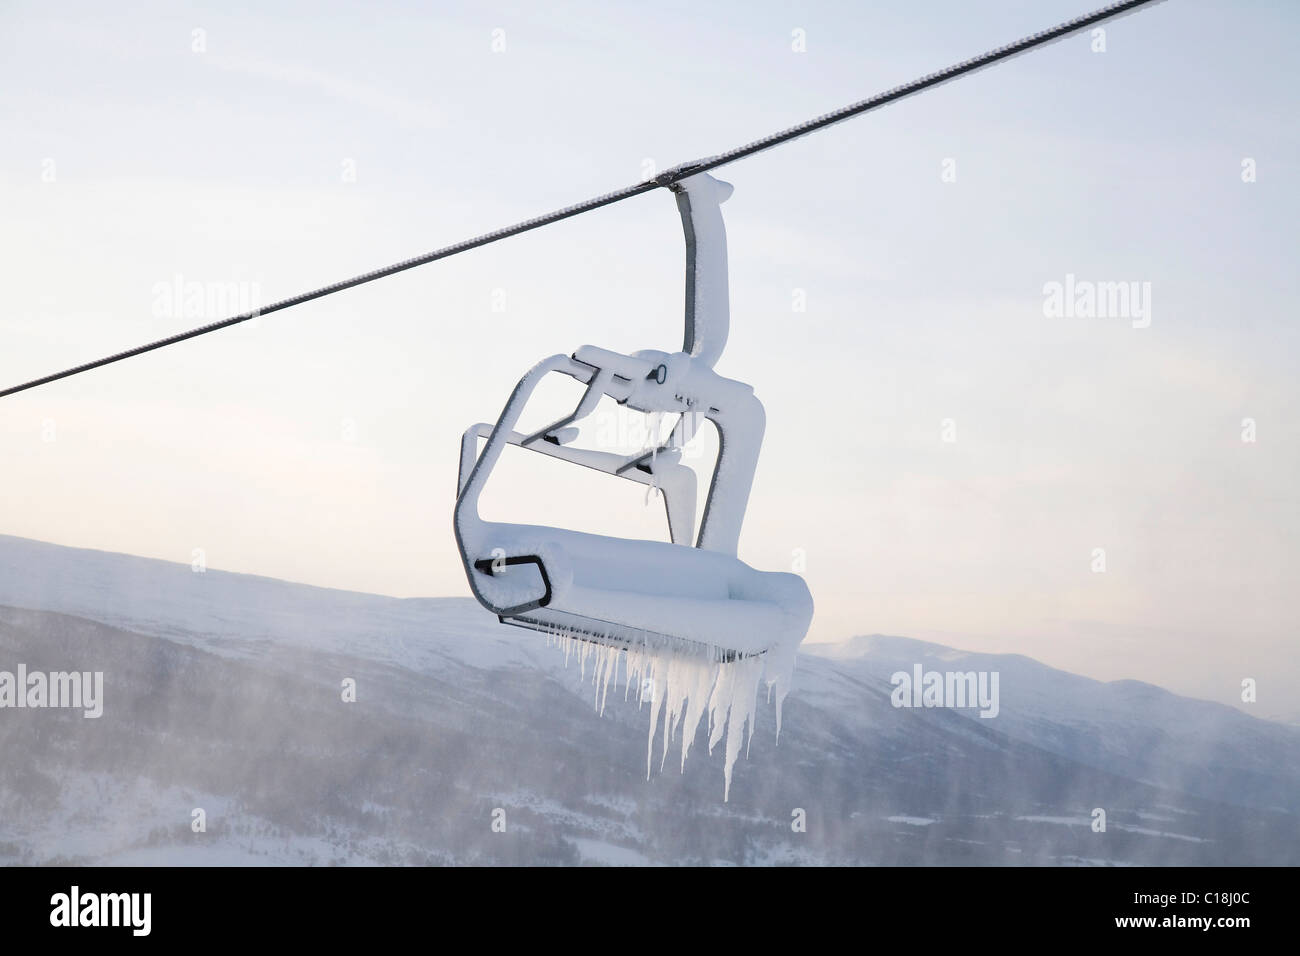 Chair lift full of snow and ice Stock Photo